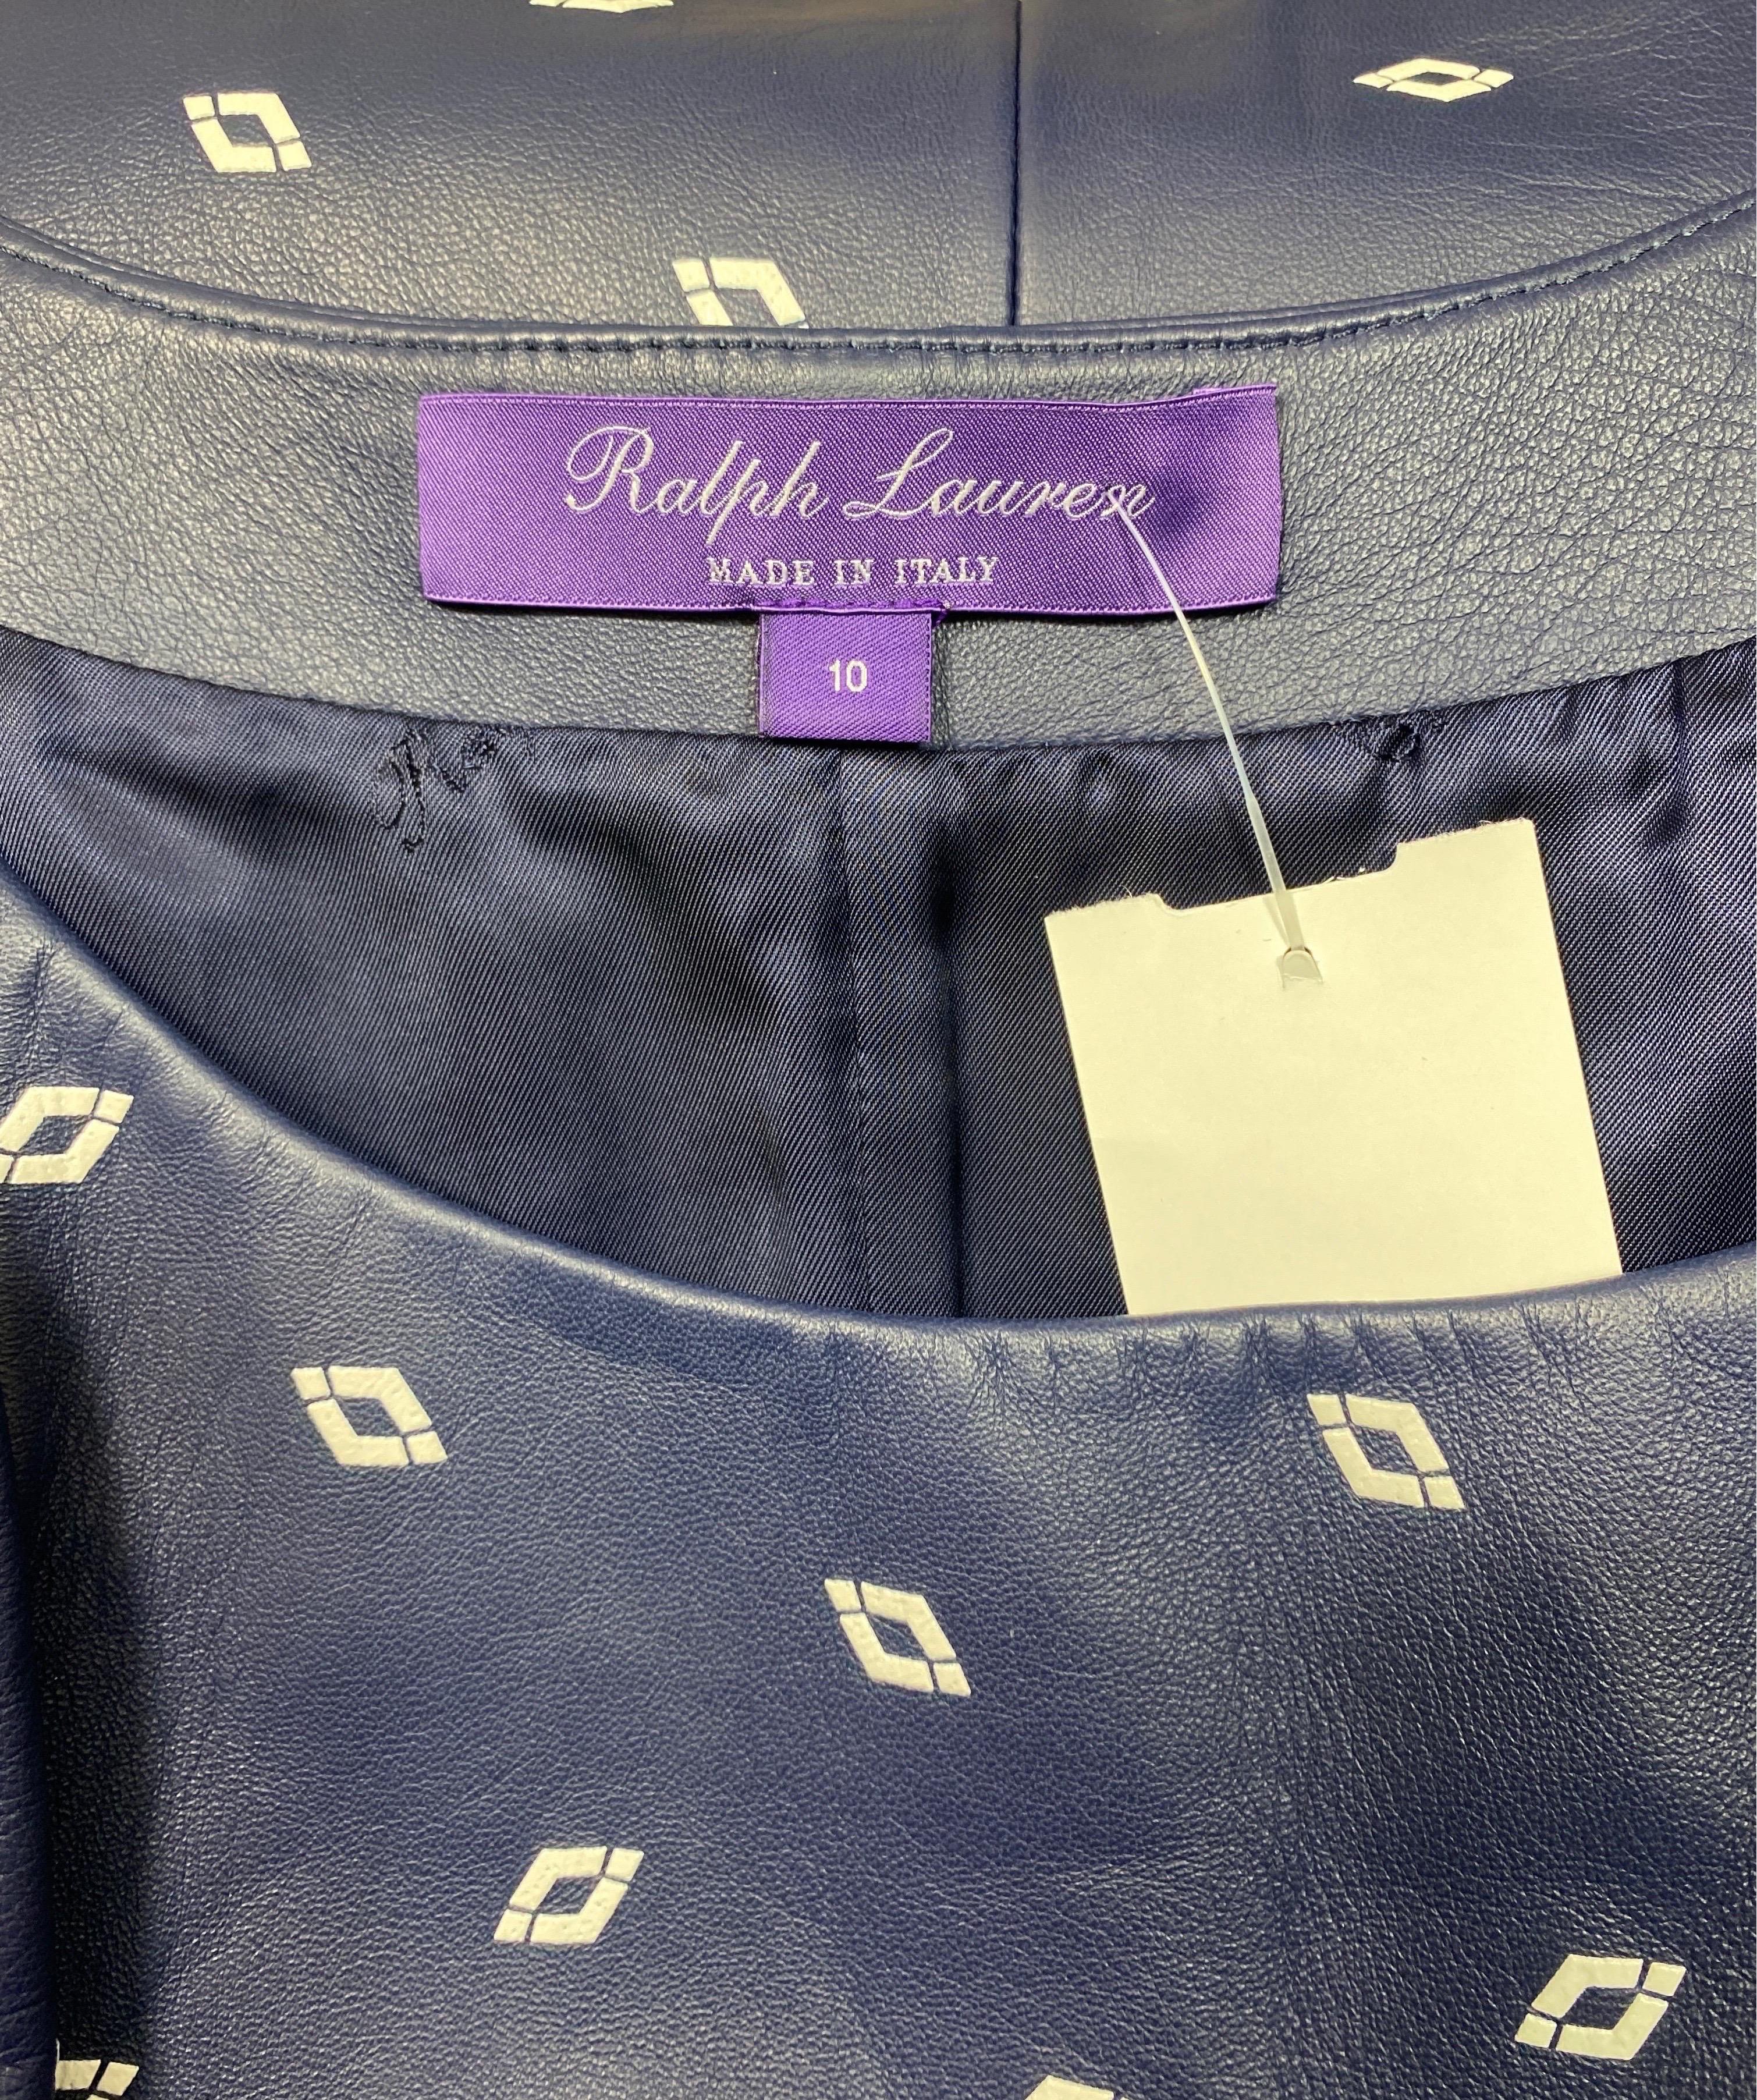 Ralph Lauren Purple Label Navy and White Leather Dress - Size 10 For Sale 8